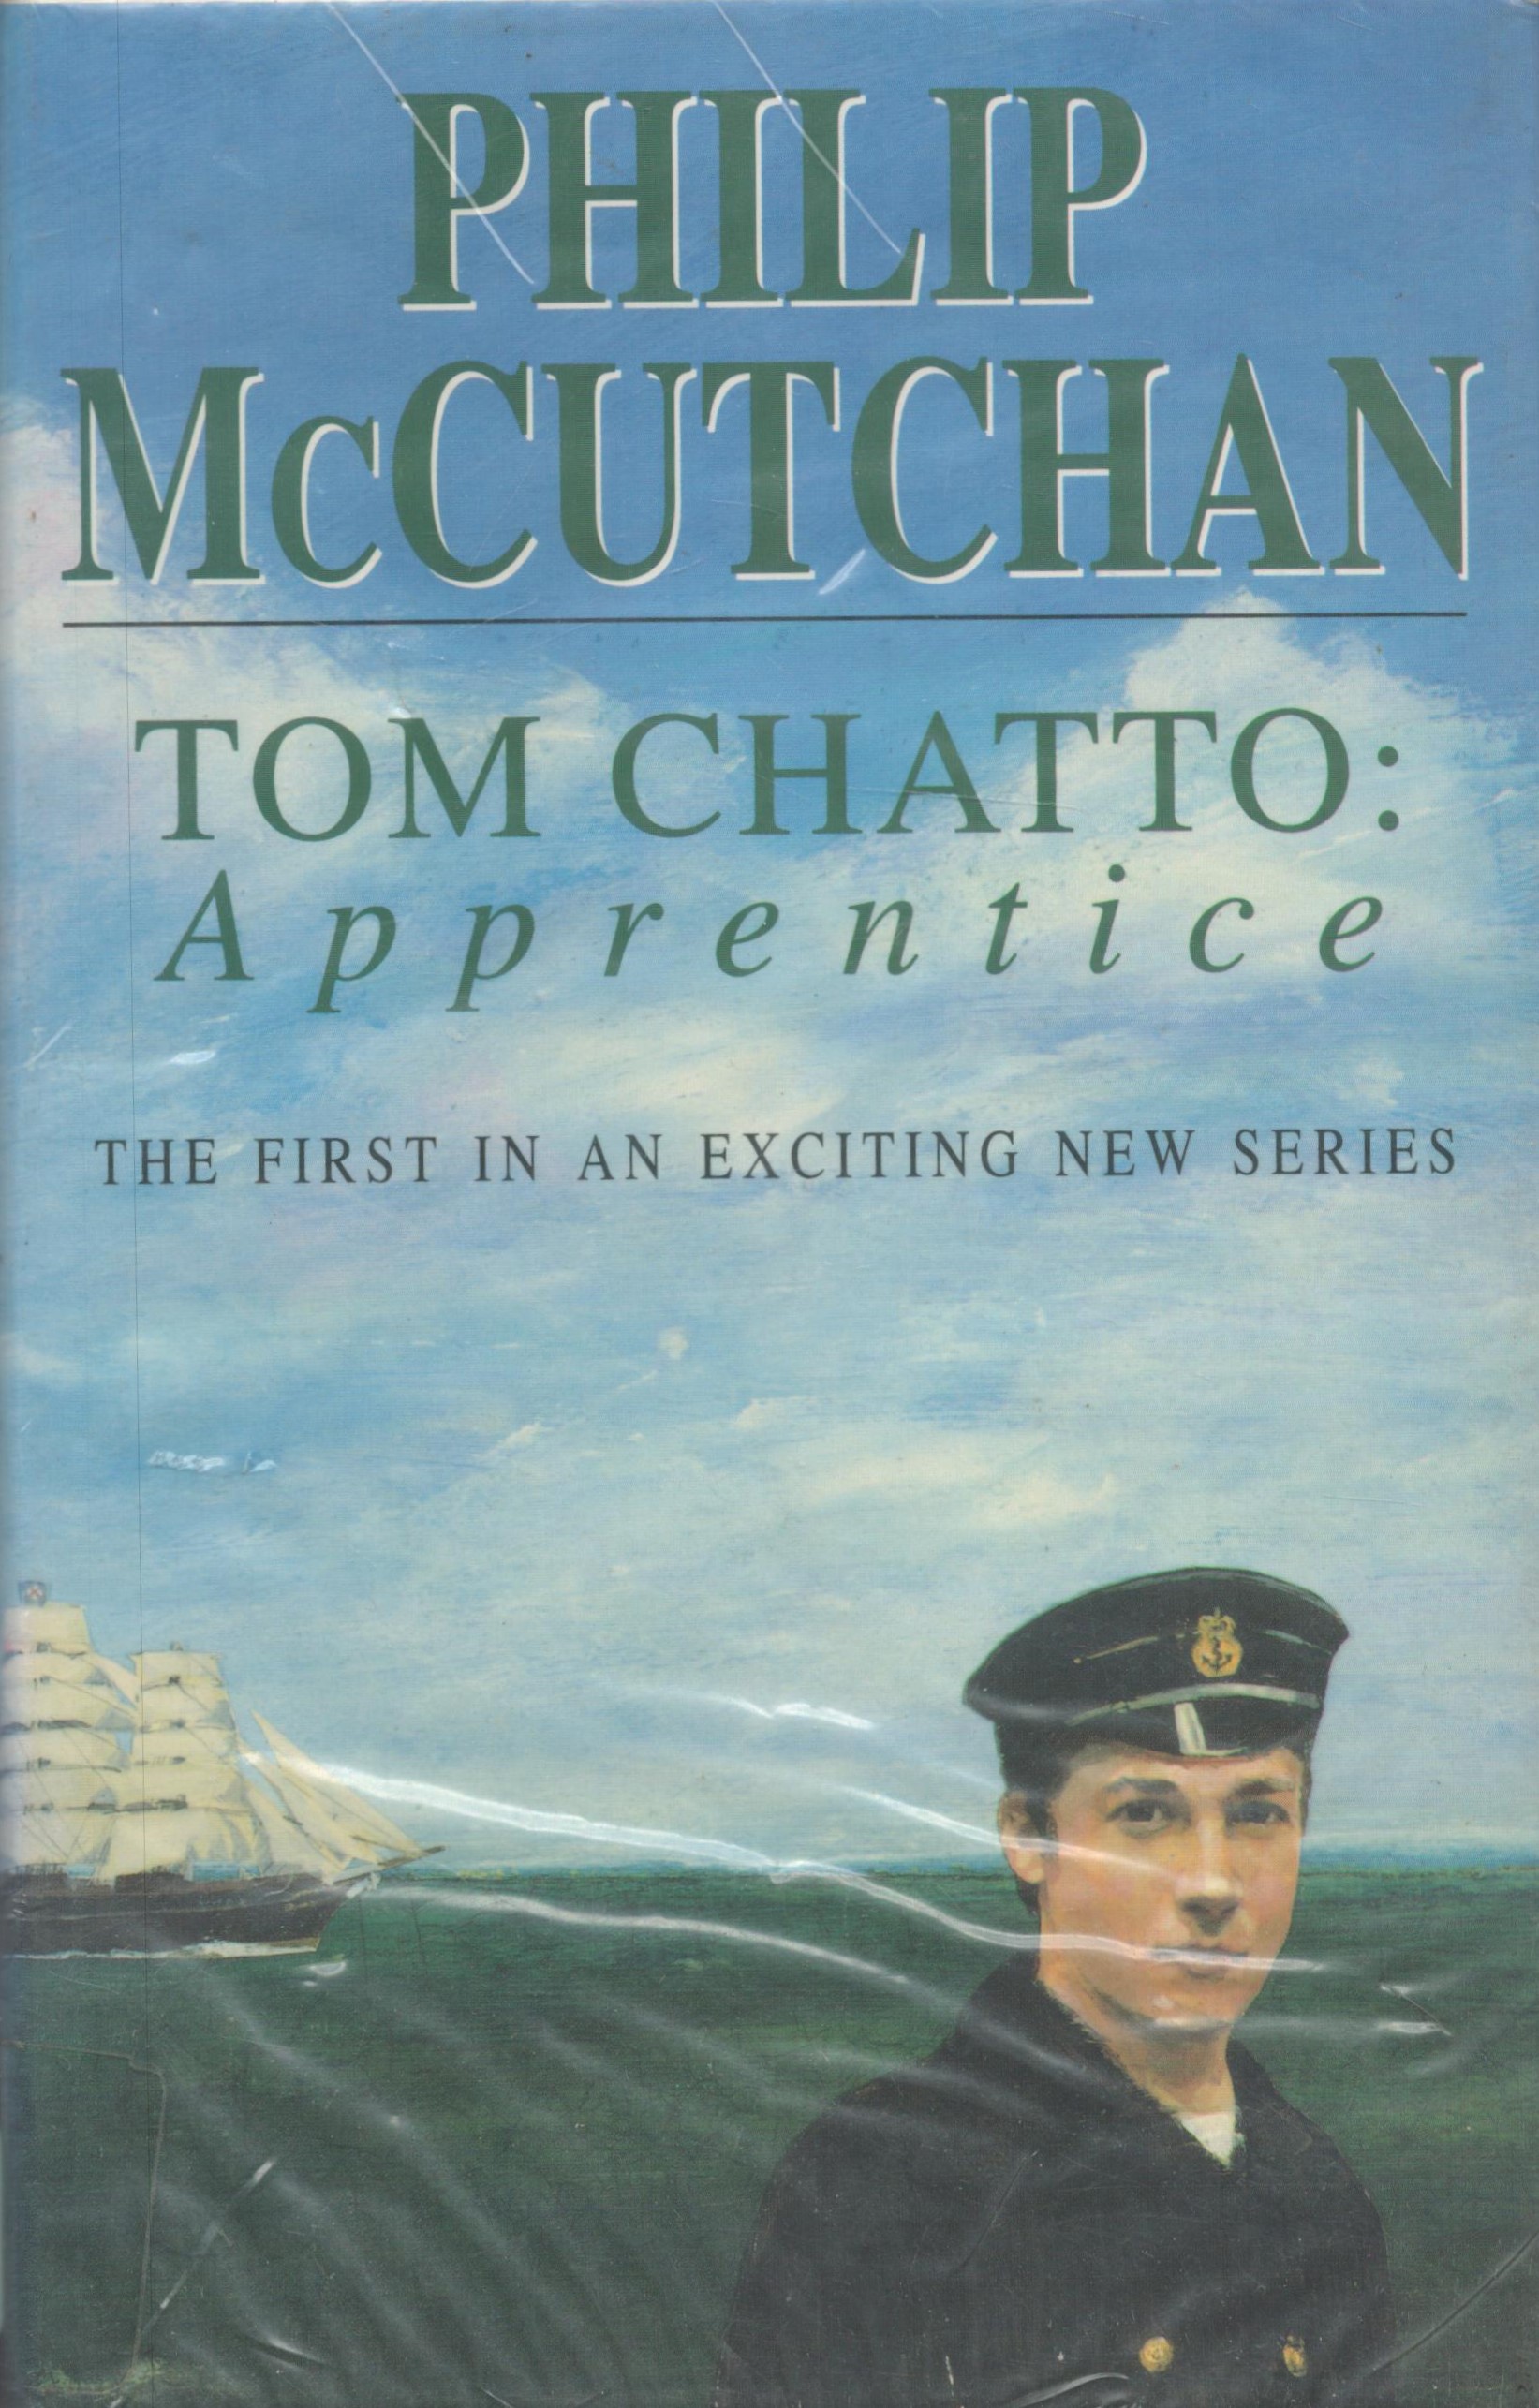 Tom Chatto, Apprentice by Philip McCutchan 1994 First Edition Hardback Book with 183 pages published